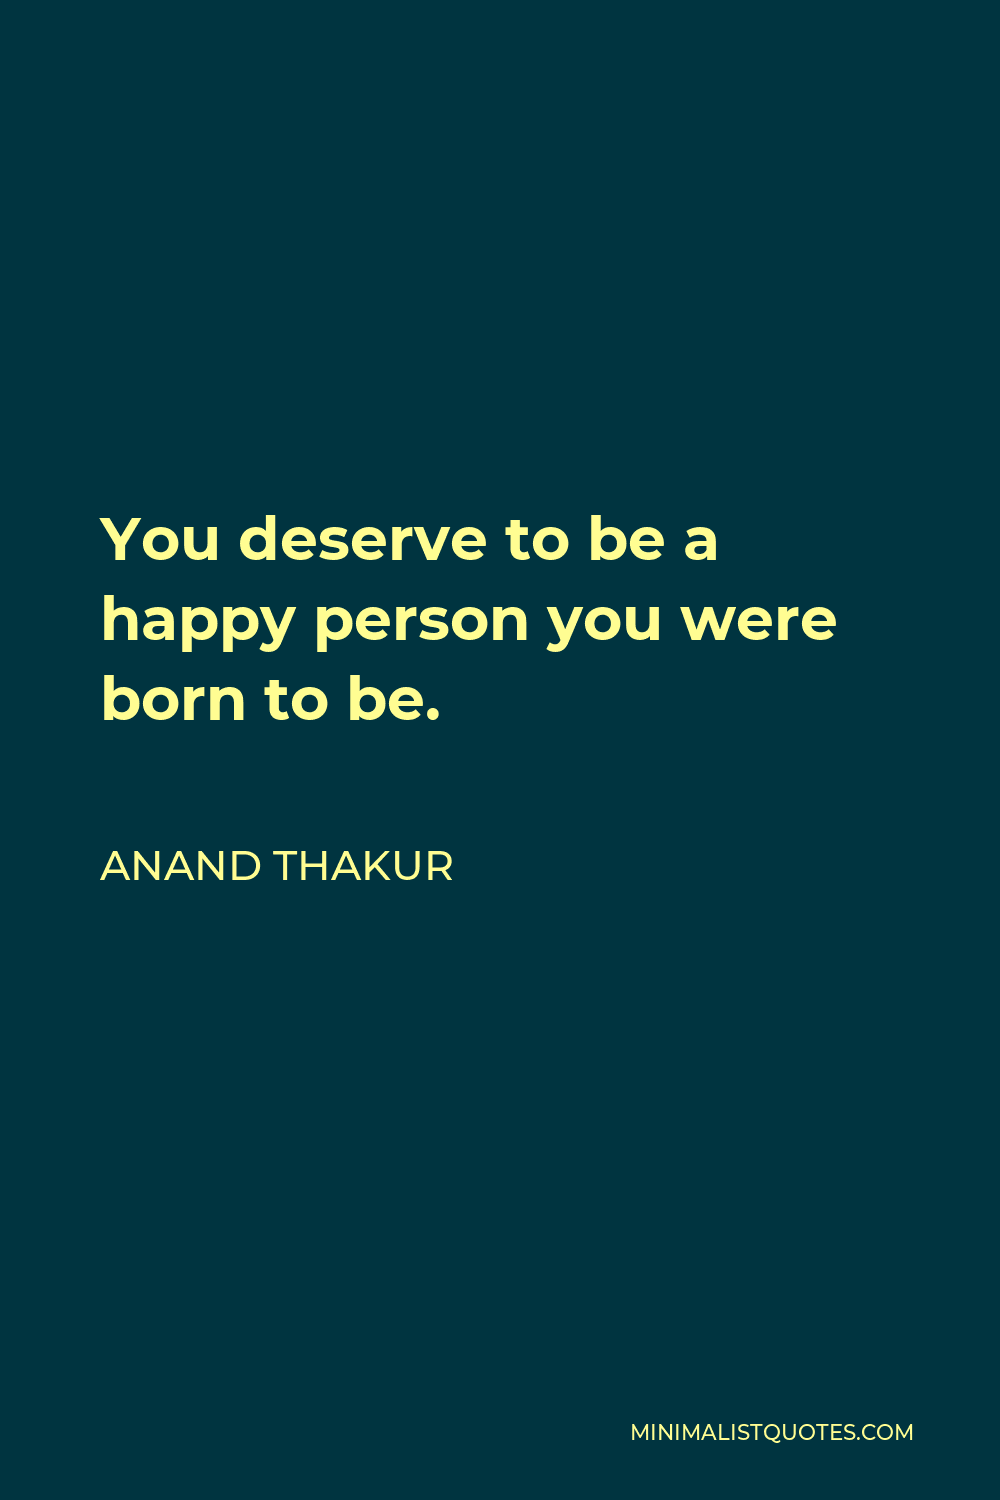 Anand Thakur Quote - You deserve to be a happy person you were born to be.